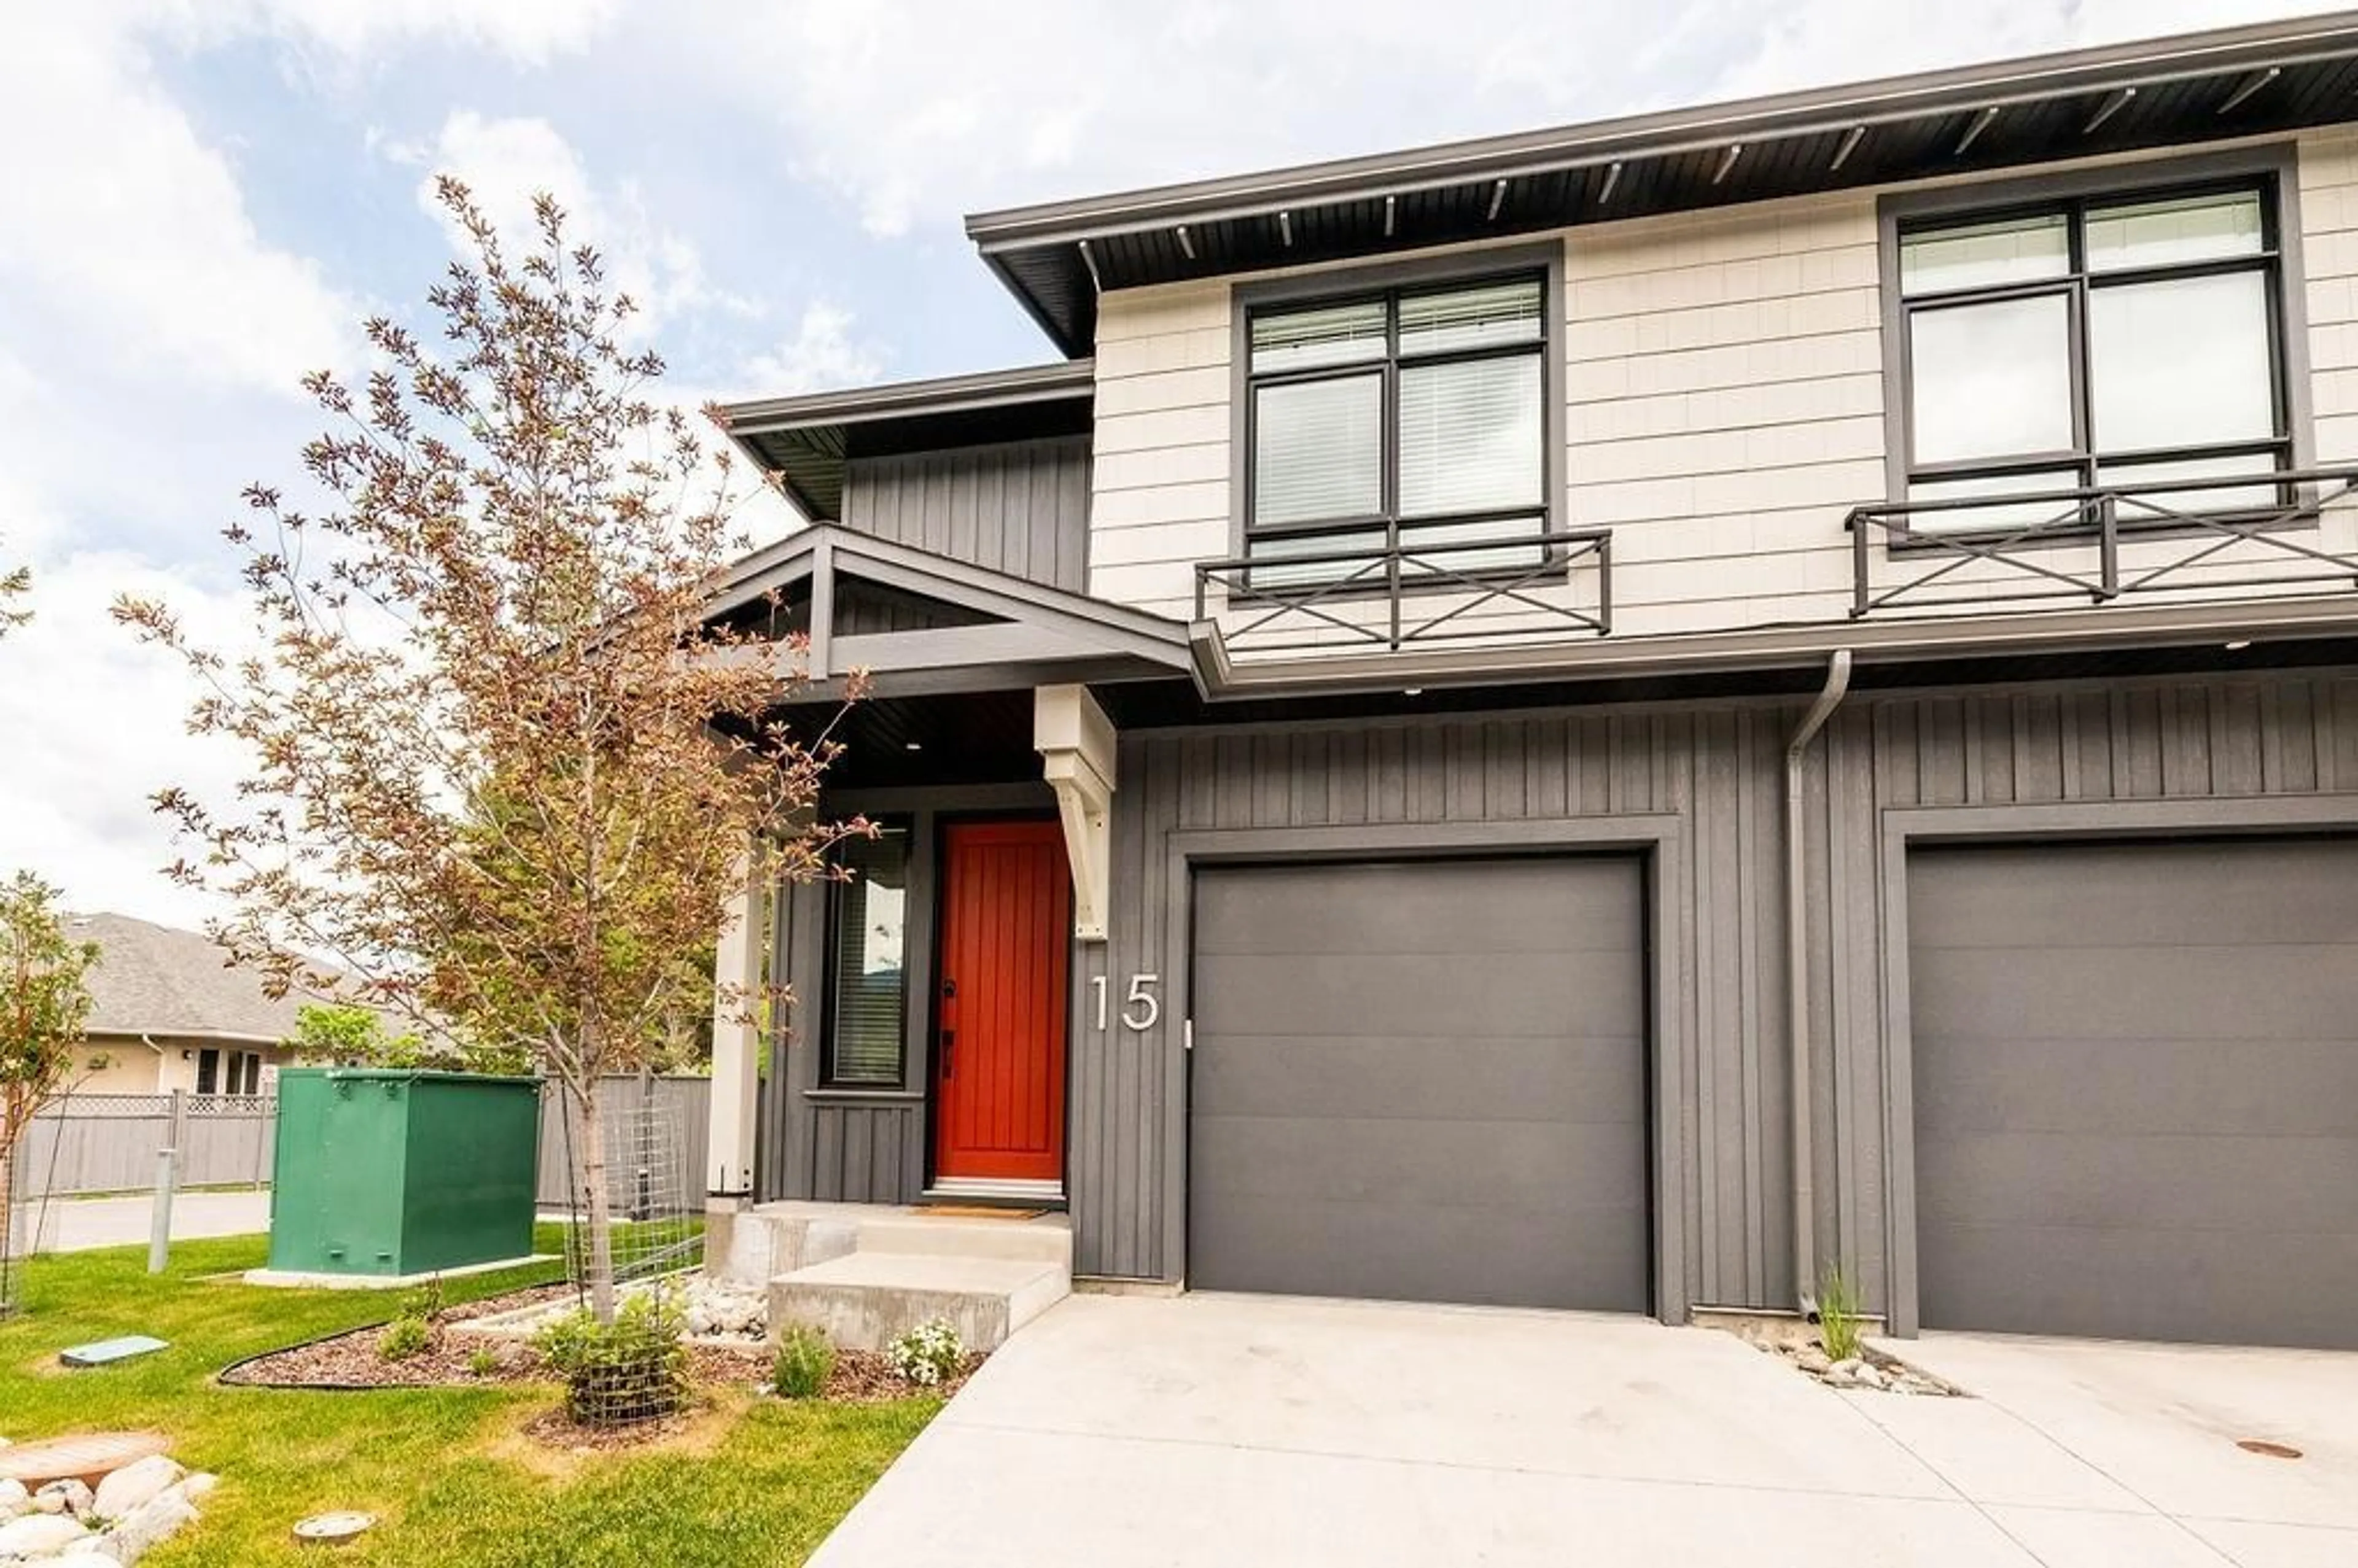 Frontside or backside of a home for 15 - 703 15A CRESCENT, Invermere British Columbia V0A1K0